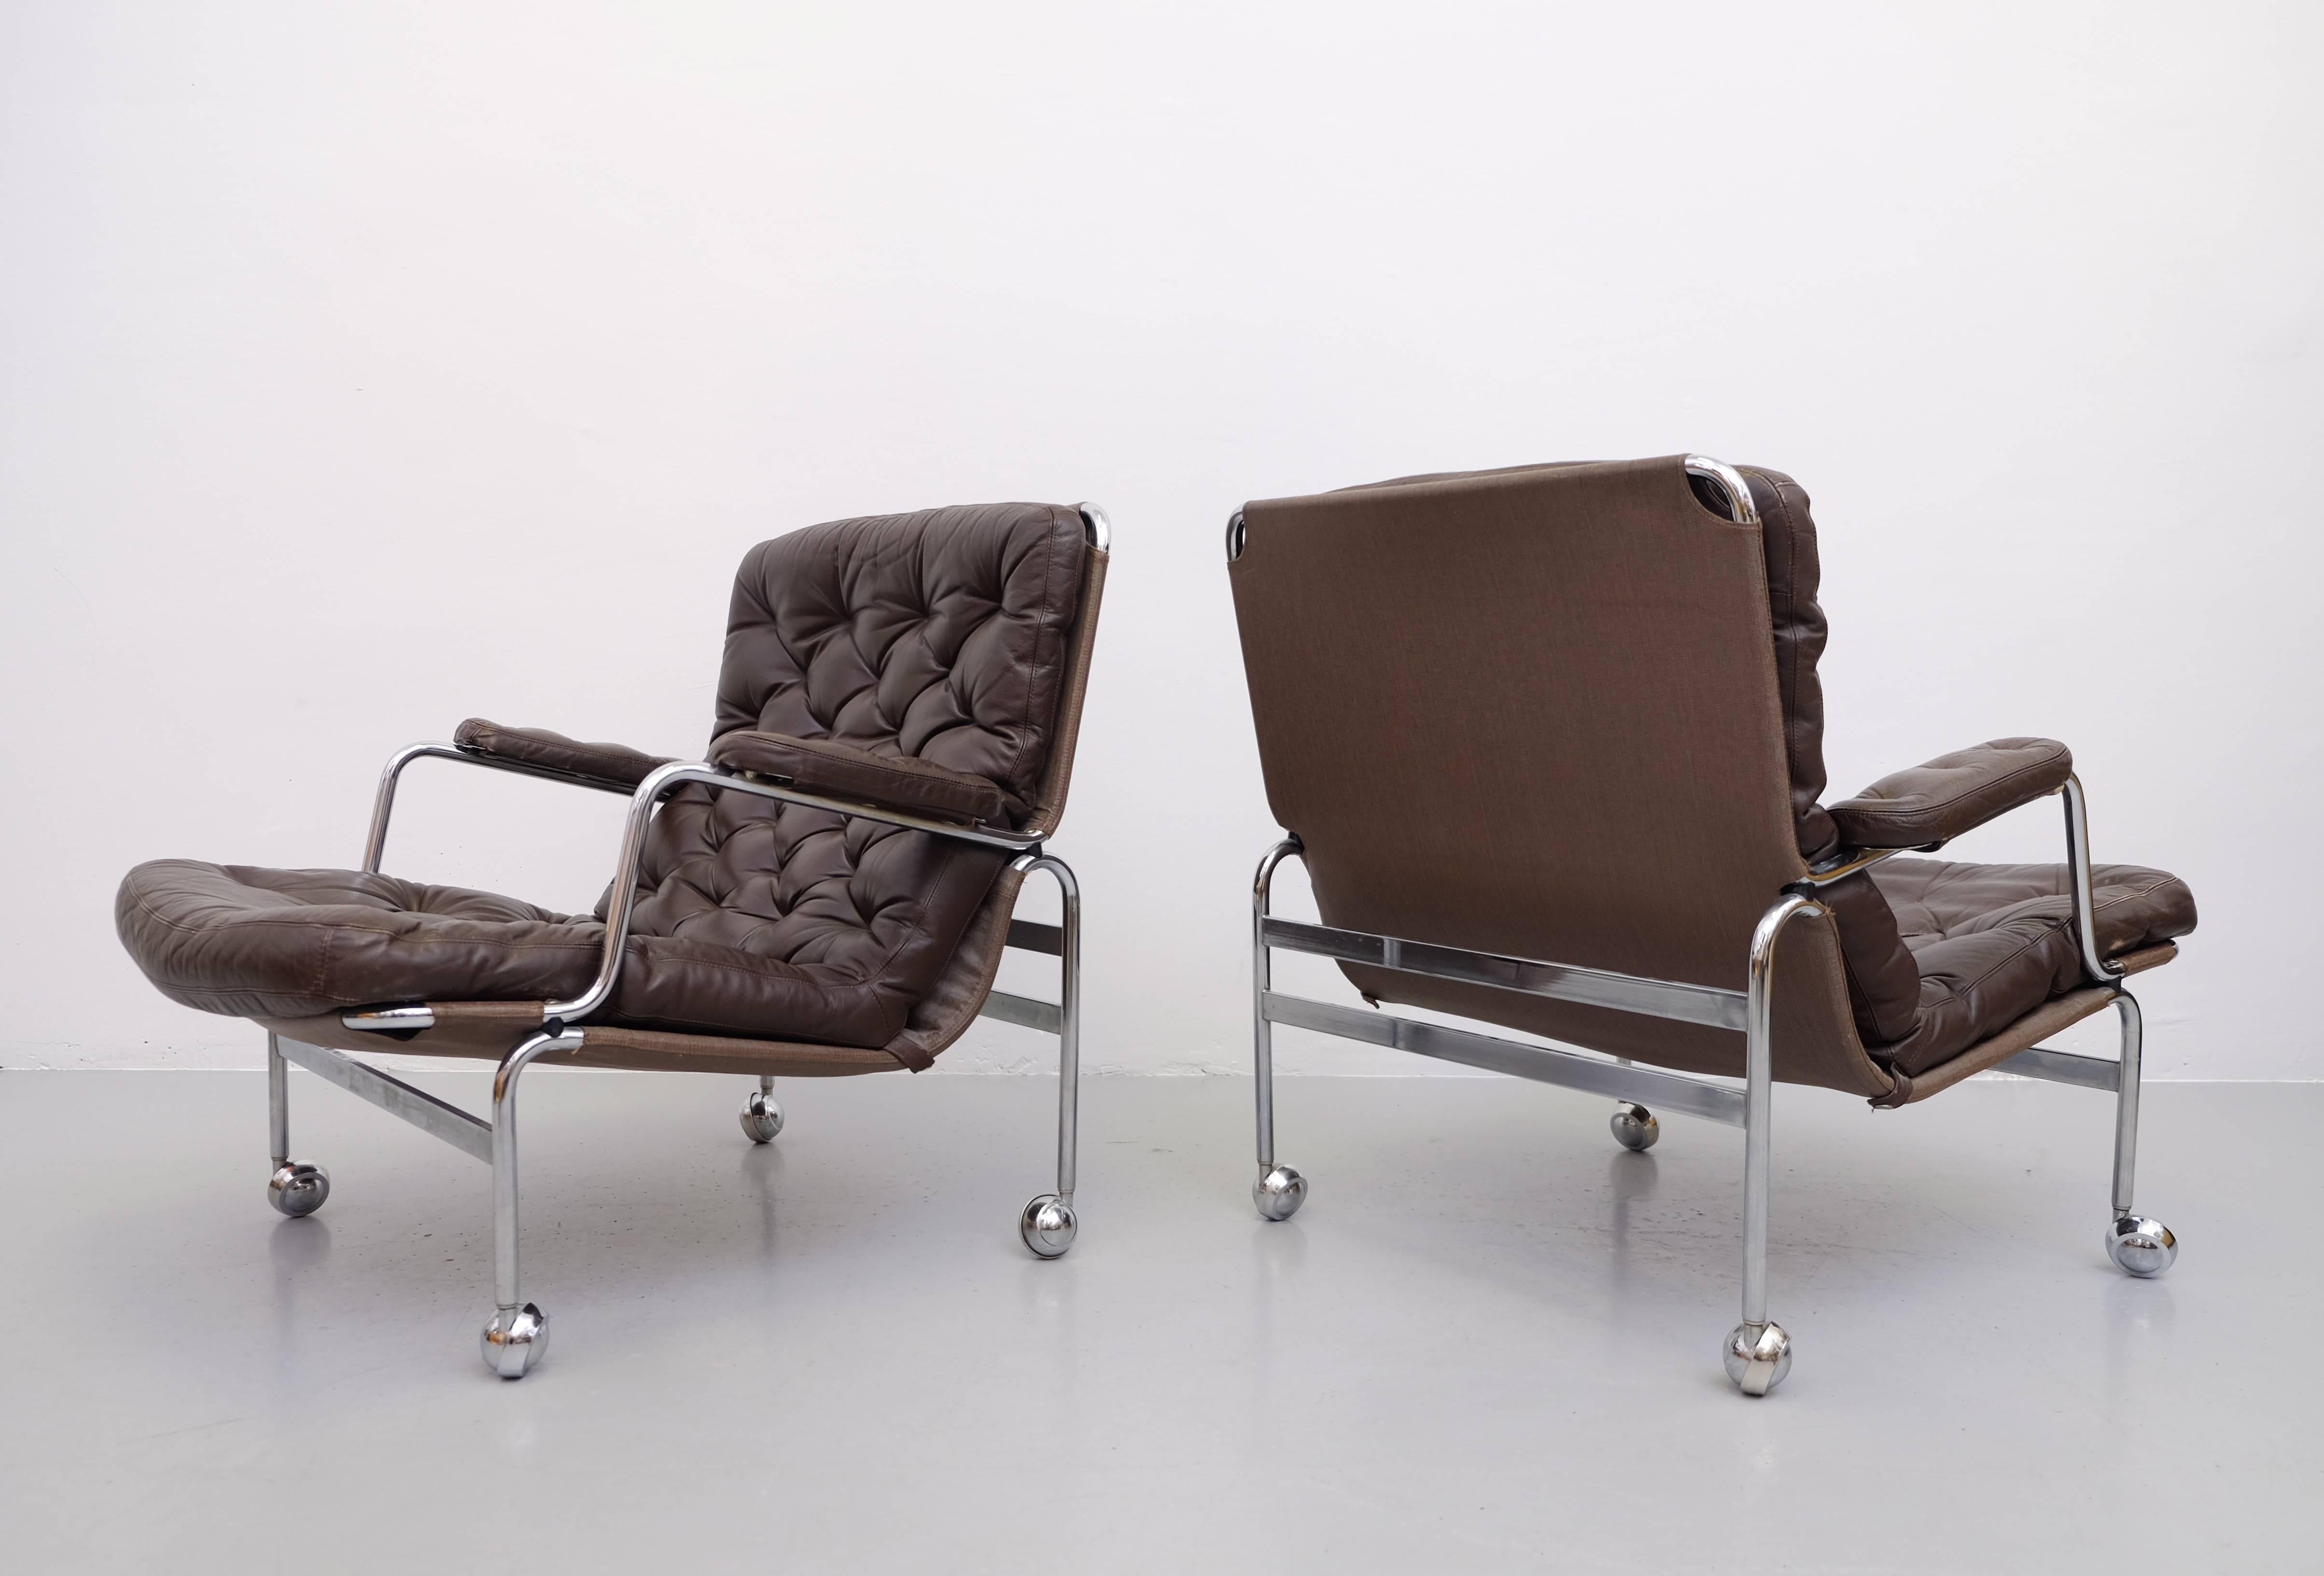 Pair of easy chairs model Karin by Bruno Mathsson. Original brown leather.
Produced by DUX, Sweden, 1960s

Global front door shipping $495.